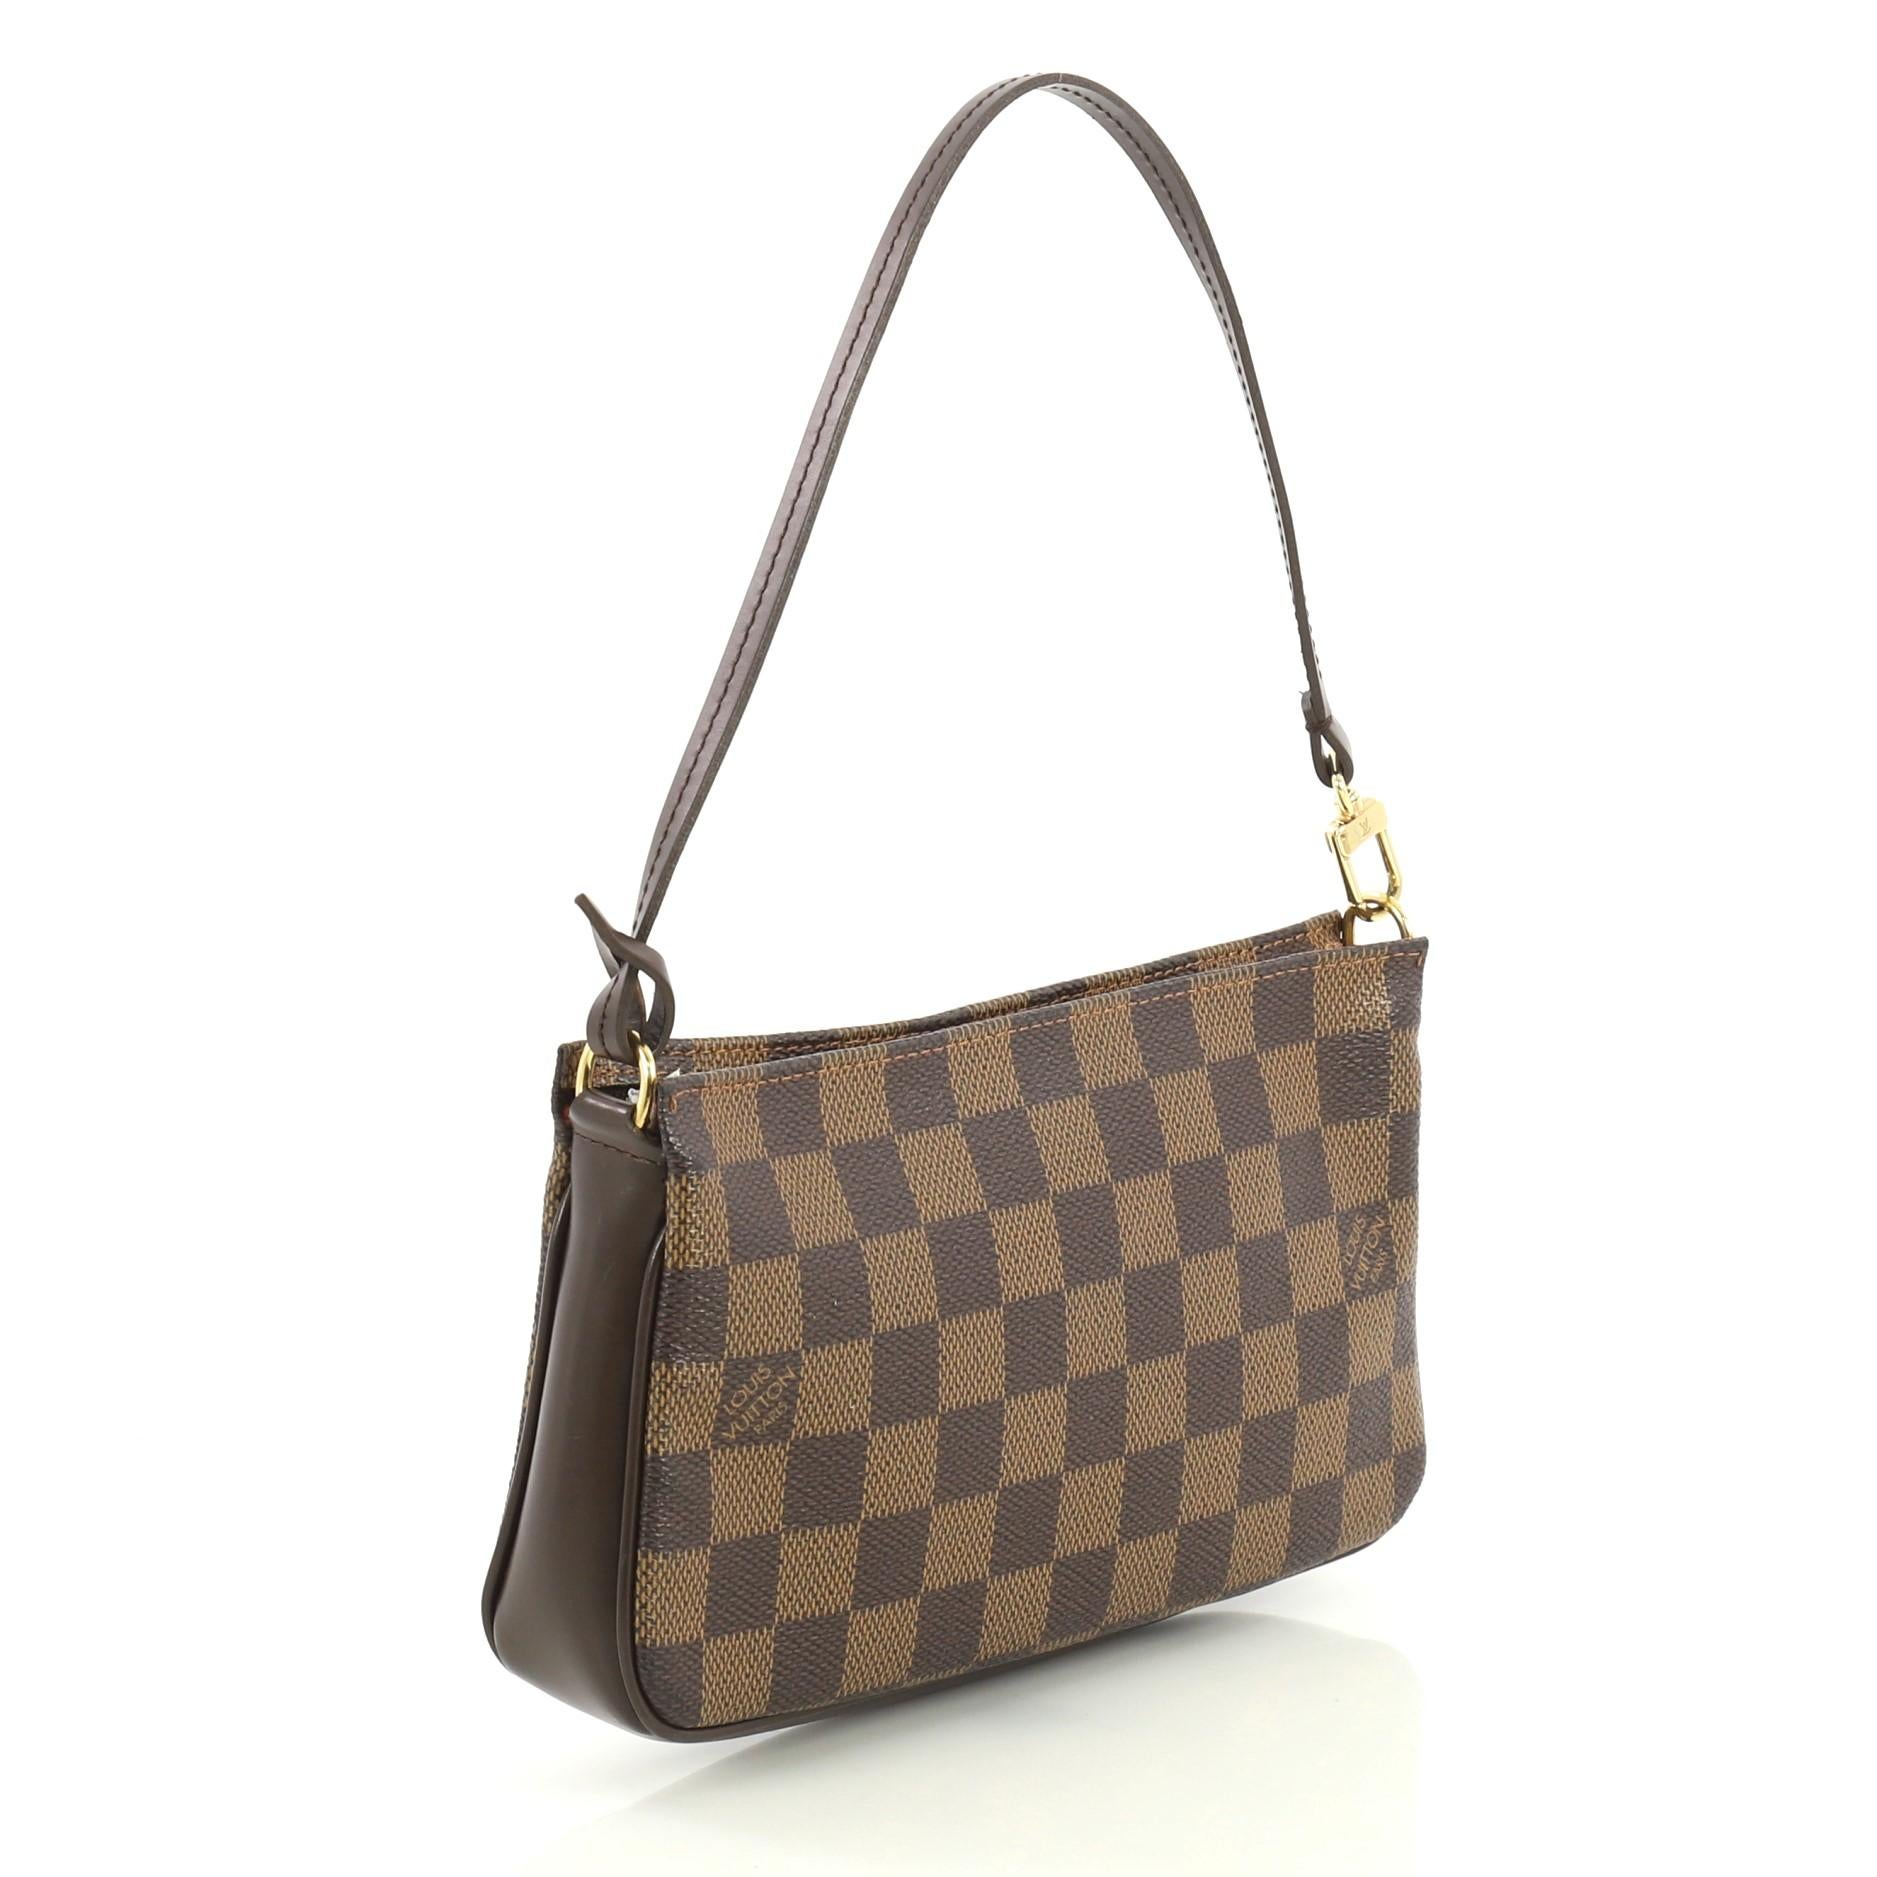 This Louis Vuitton Navona Pochette Accessoires Damier, crafted from damier ebene coated canvas, features a flat leather strap and gold-tone hardware. Its zip closure opens to a red fabric interior. Authenticity code reads: FL0072. 

Condition: